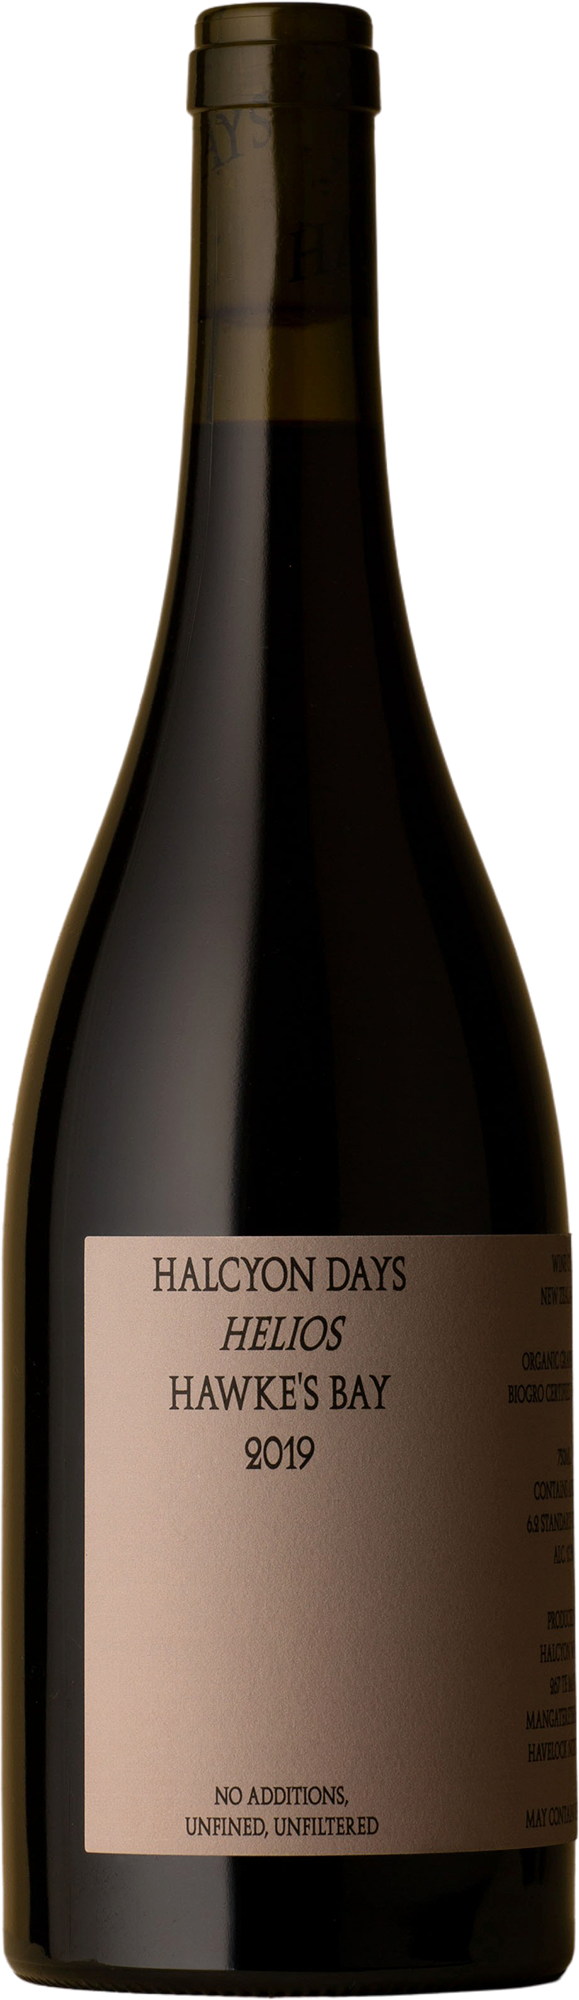 Halcyon Days - Helios Sangiovese 2019 Red Wine